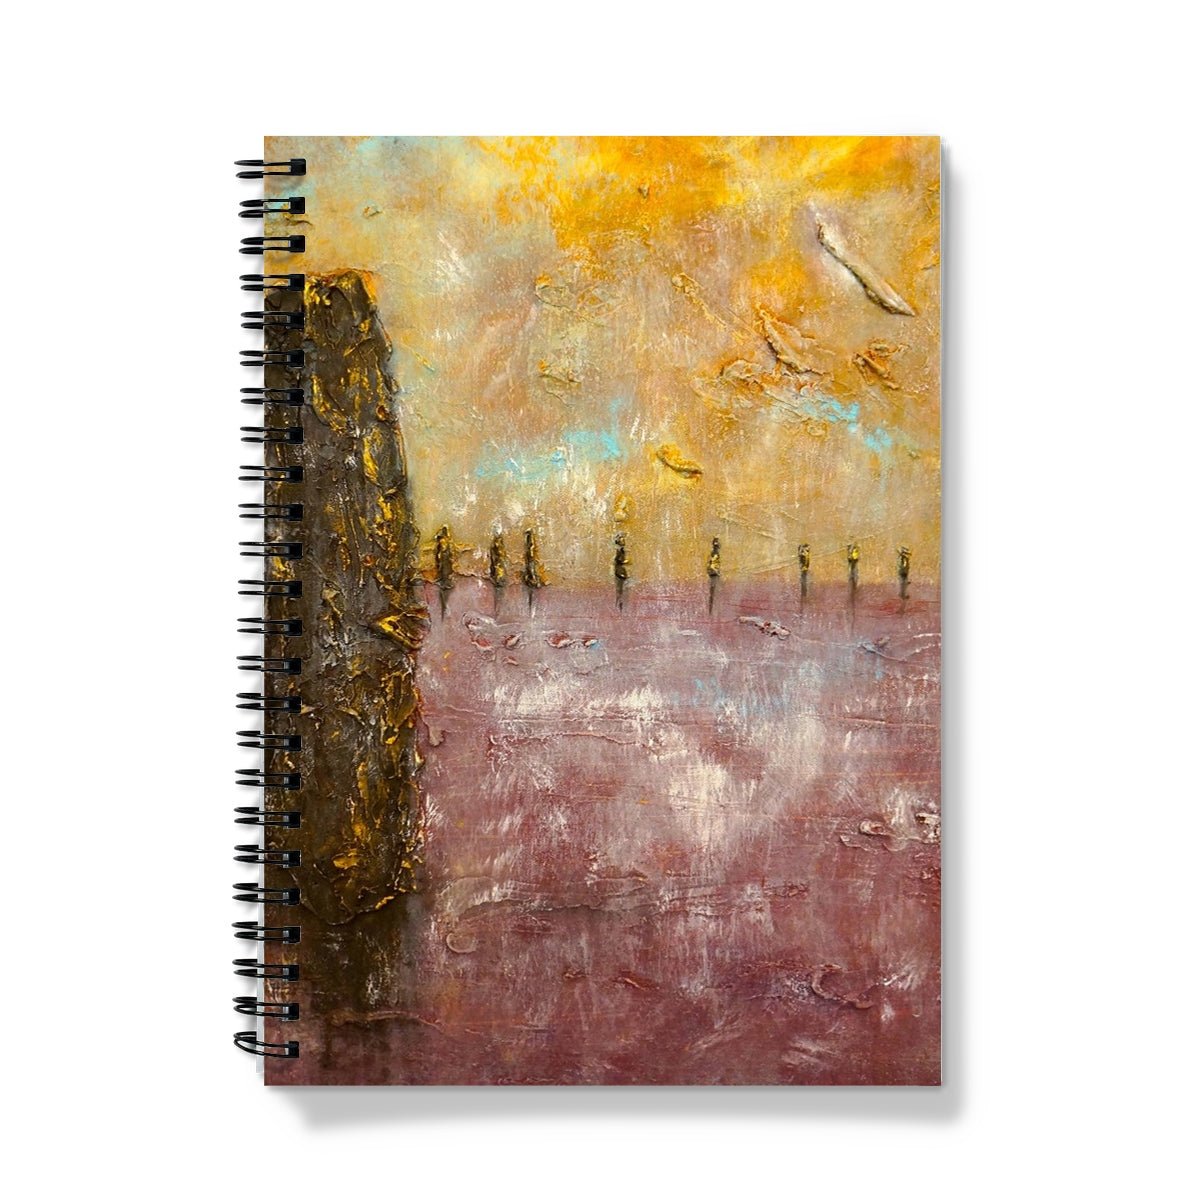 Bordgar Mist Orkney Art Gifts Notebook-Journals & Notebooks-Orkney Art Gallery-A4-Lined-Paintings, Prints, Homeware, Art Gifts From Scotland By Scottish Artist Kevin Hunter